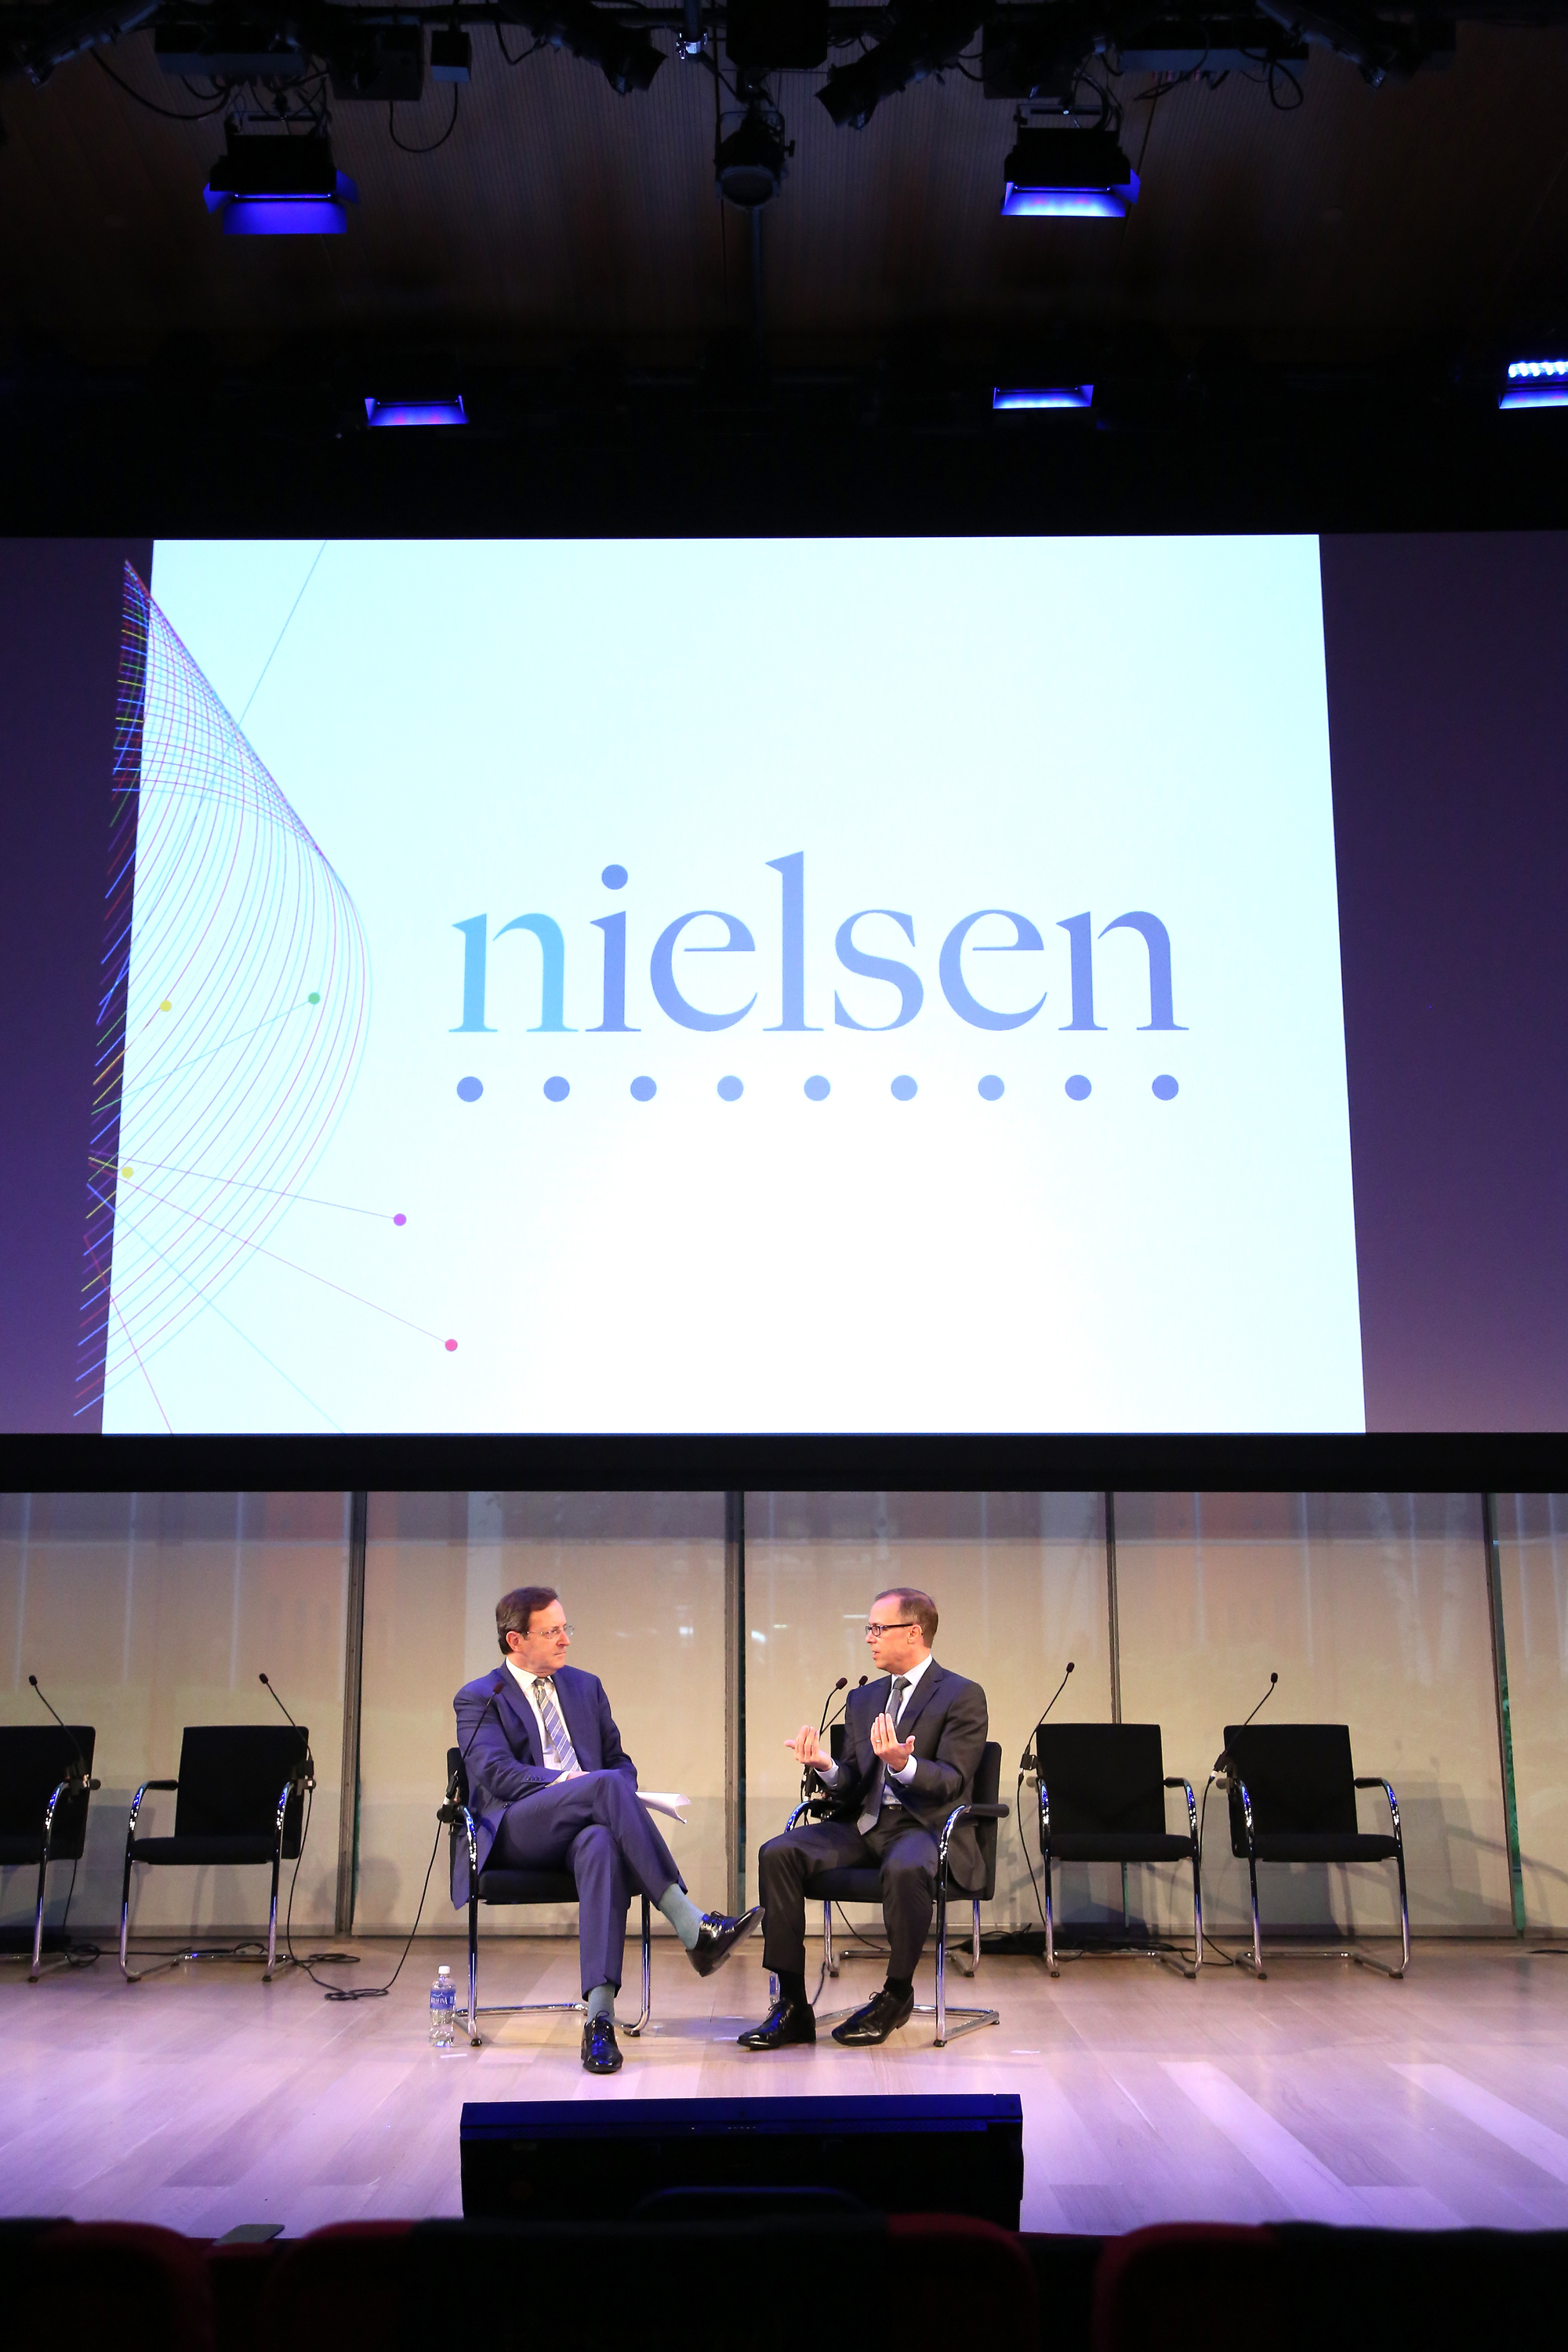 Senior Correspondent at CBS News, Anthony Mason (L) and CEO at Nielsen, Mitch Barns speak onstage at The Future of Measurement panel September 30, 2014 in New York City. (Monica Schipper—2014 Getty Images)